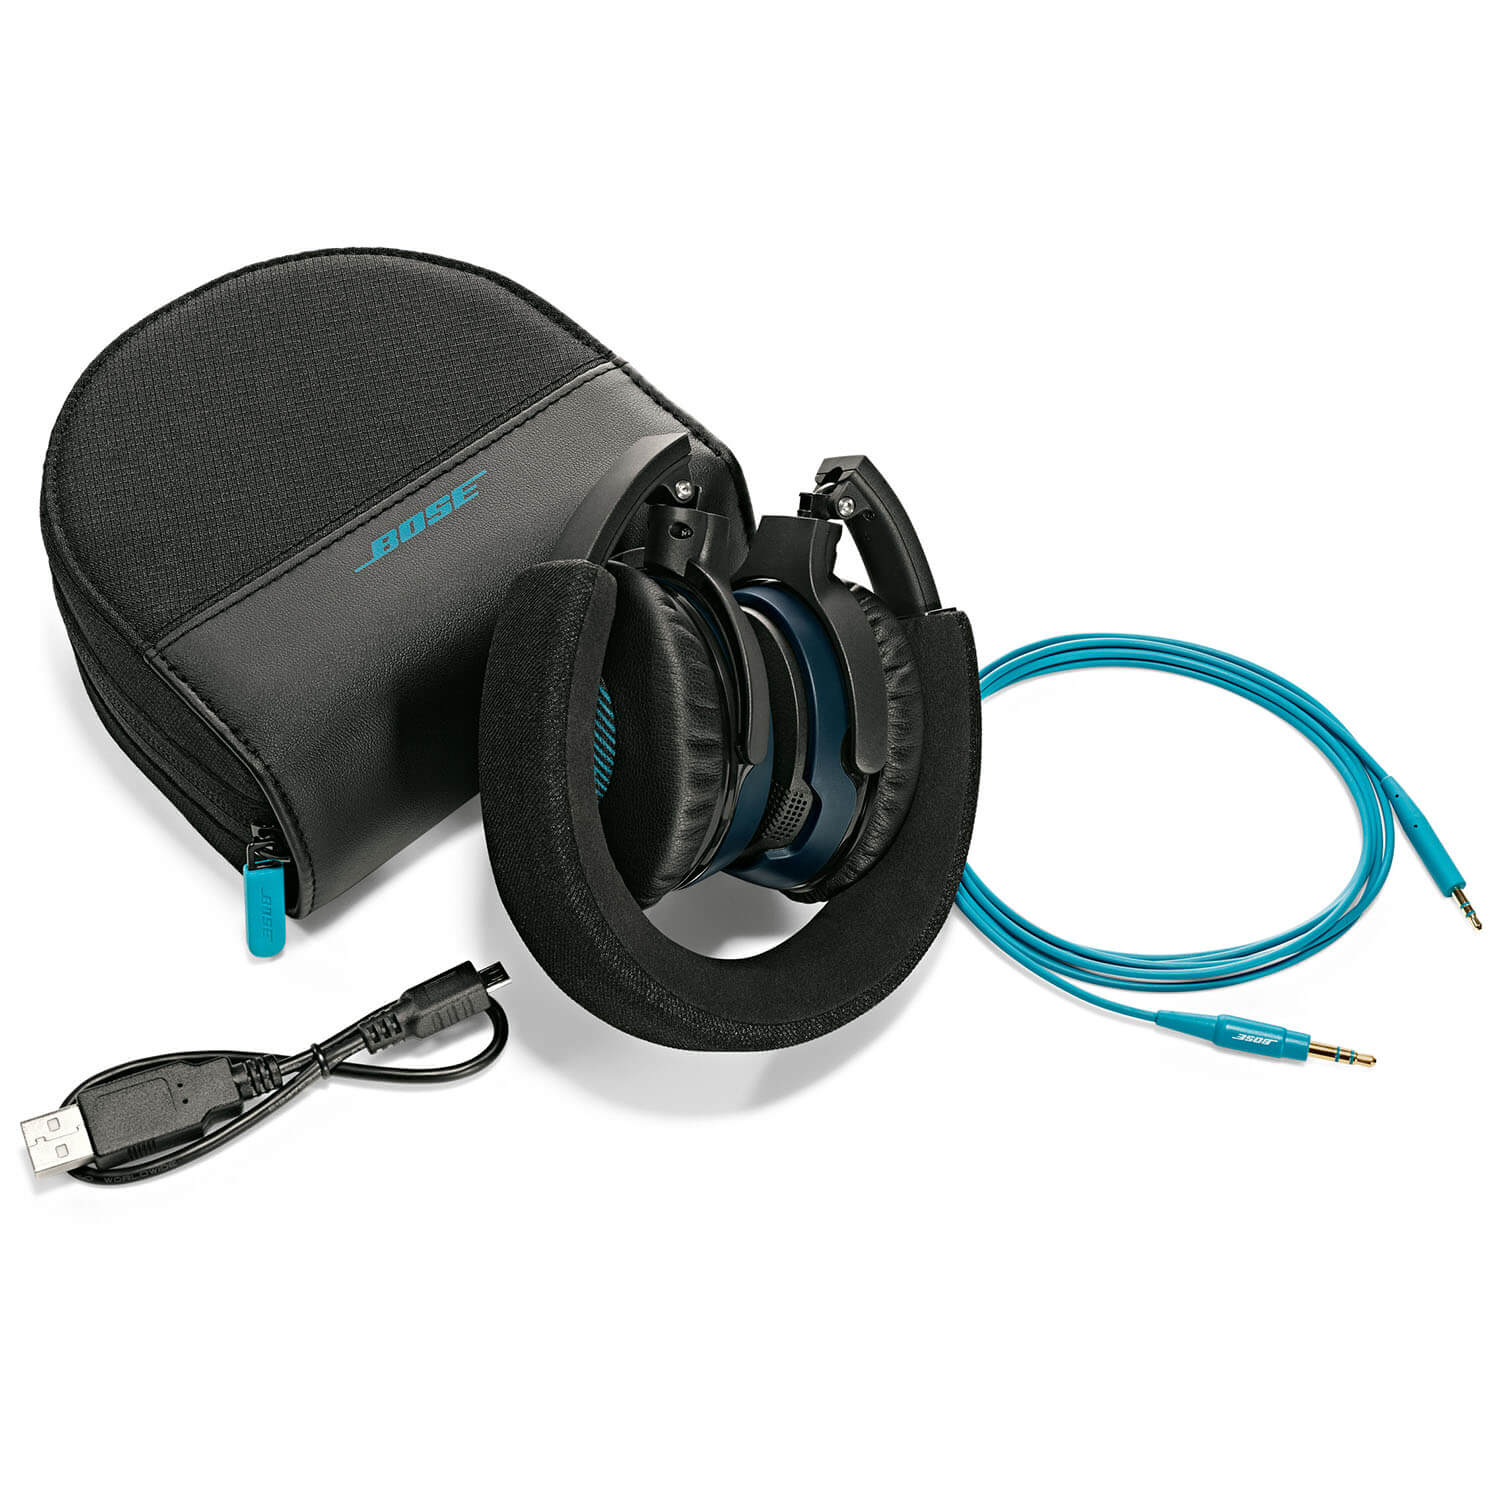 Bose On Ear Headphones Offer Superior Sound Quality l Shop In Miami